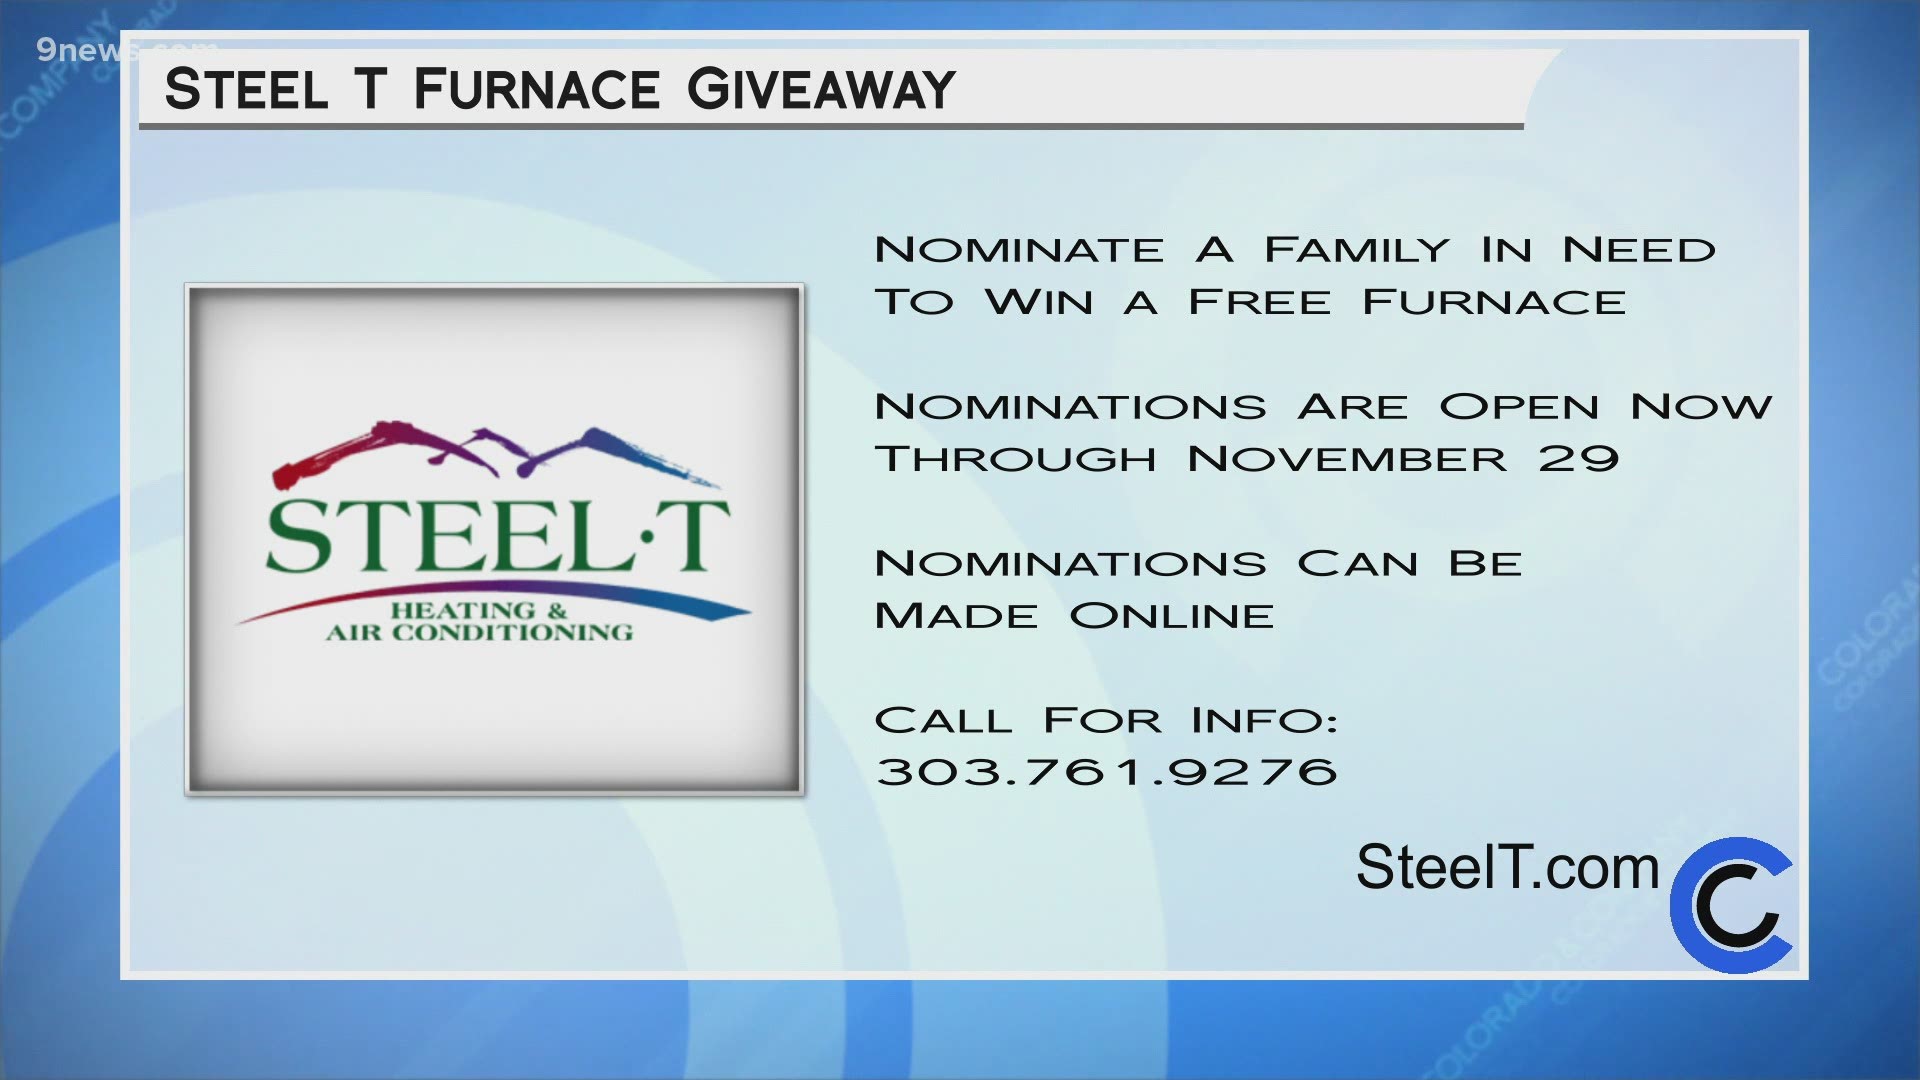 Steel T and Carrier Colorado are giving a furnace to a family in need this holiday season. Learn more and nominate someone at SteelT.com or call 303.761.9276.